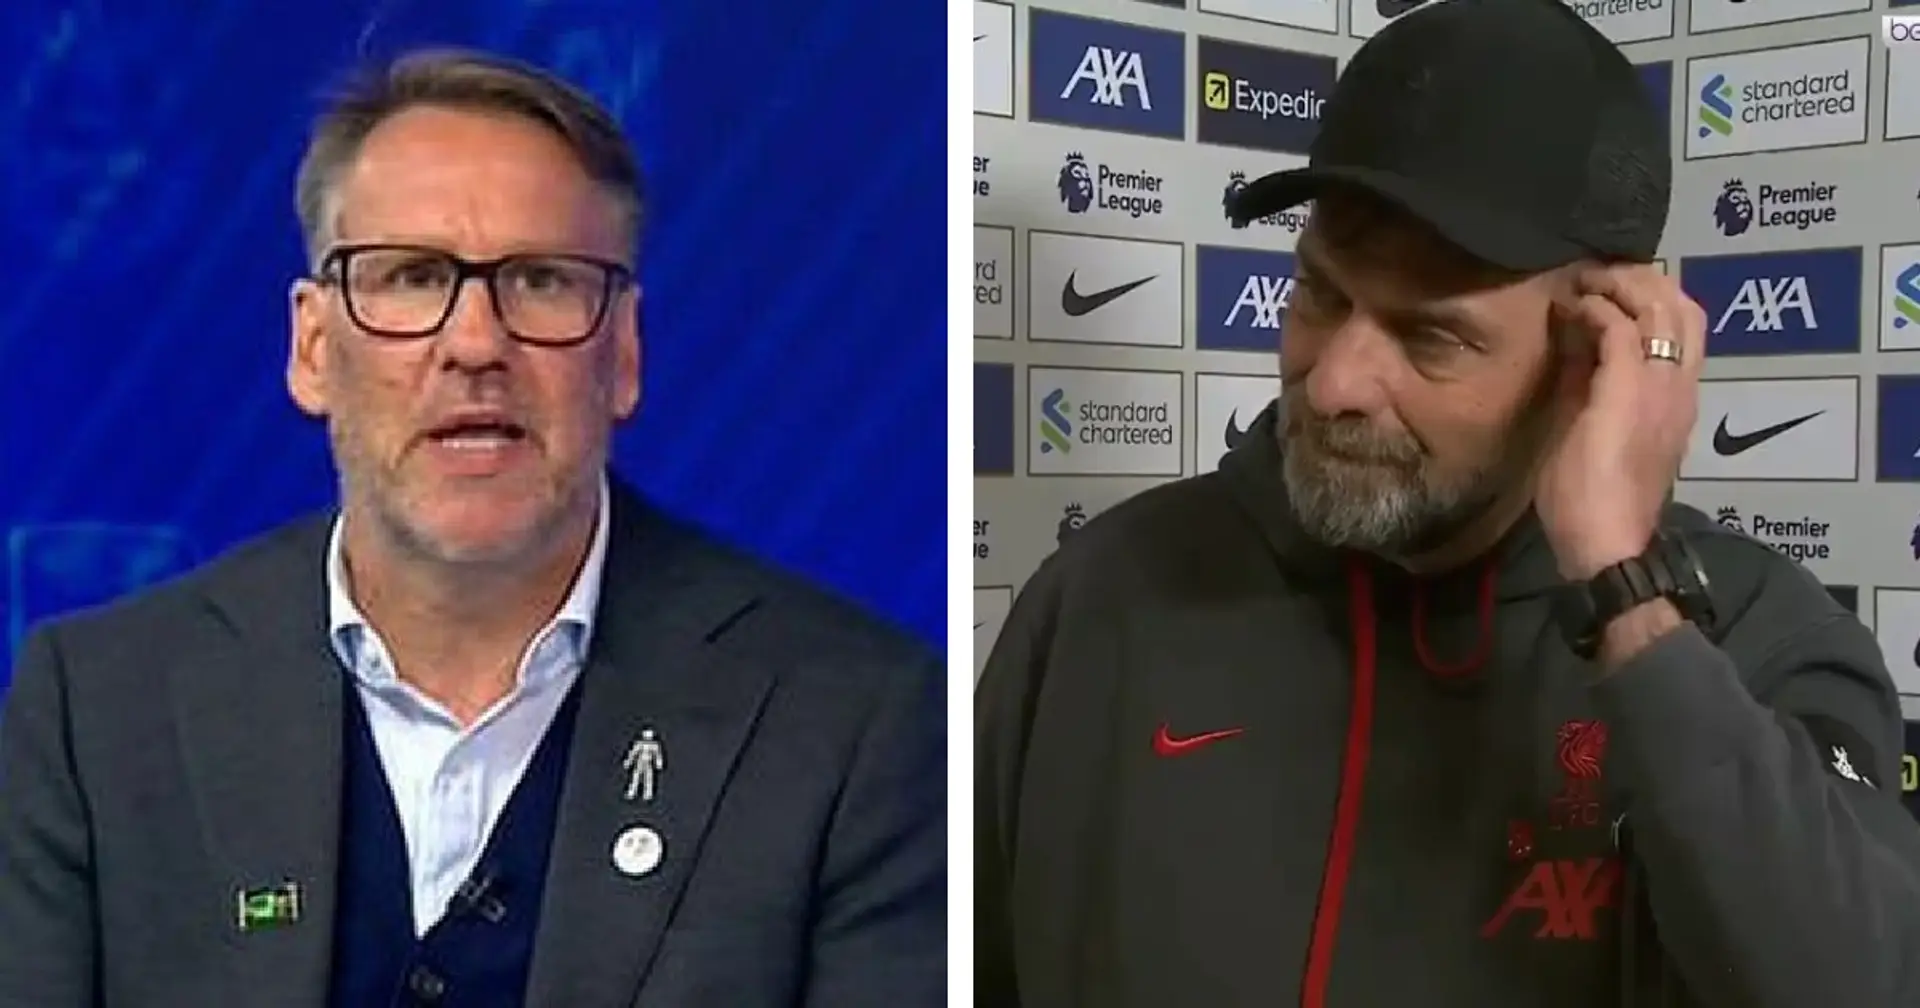 'You just can’t with six games to go': Merson explains why he loved Klopp's post-match interview 